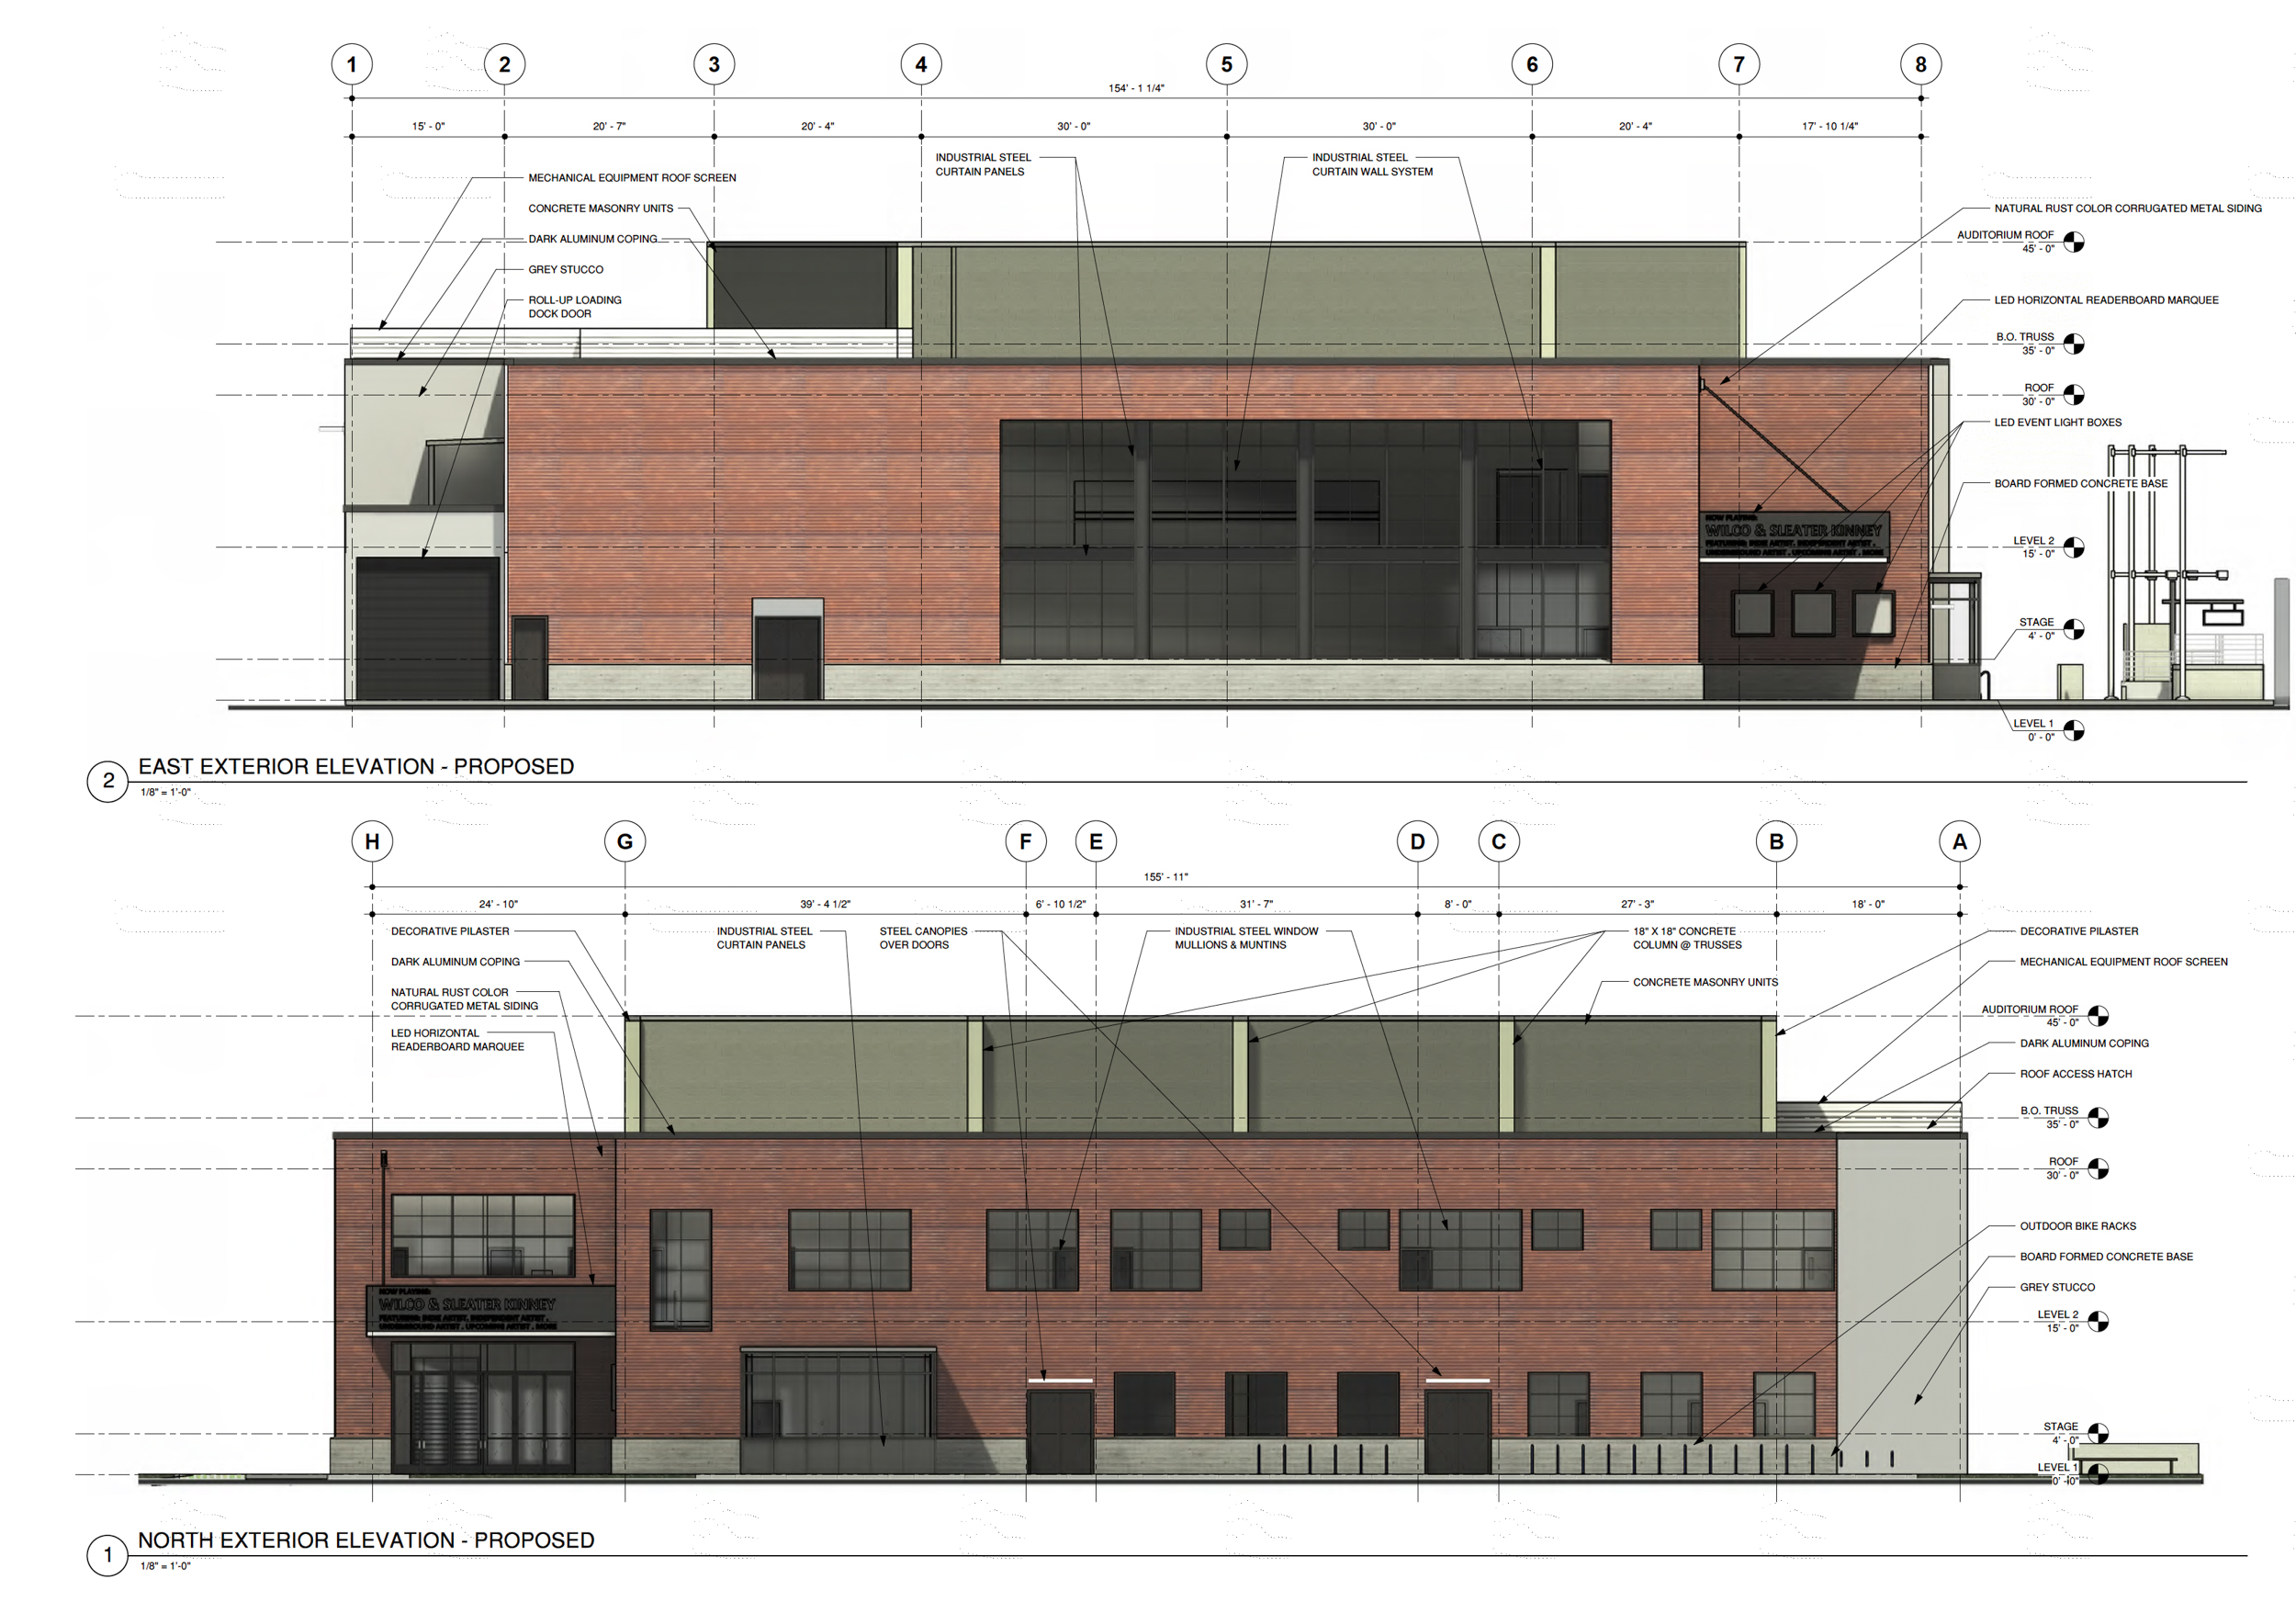 24R Theater at 1800 24th Street facade elevation, illustration via CAW and Ellis Architects